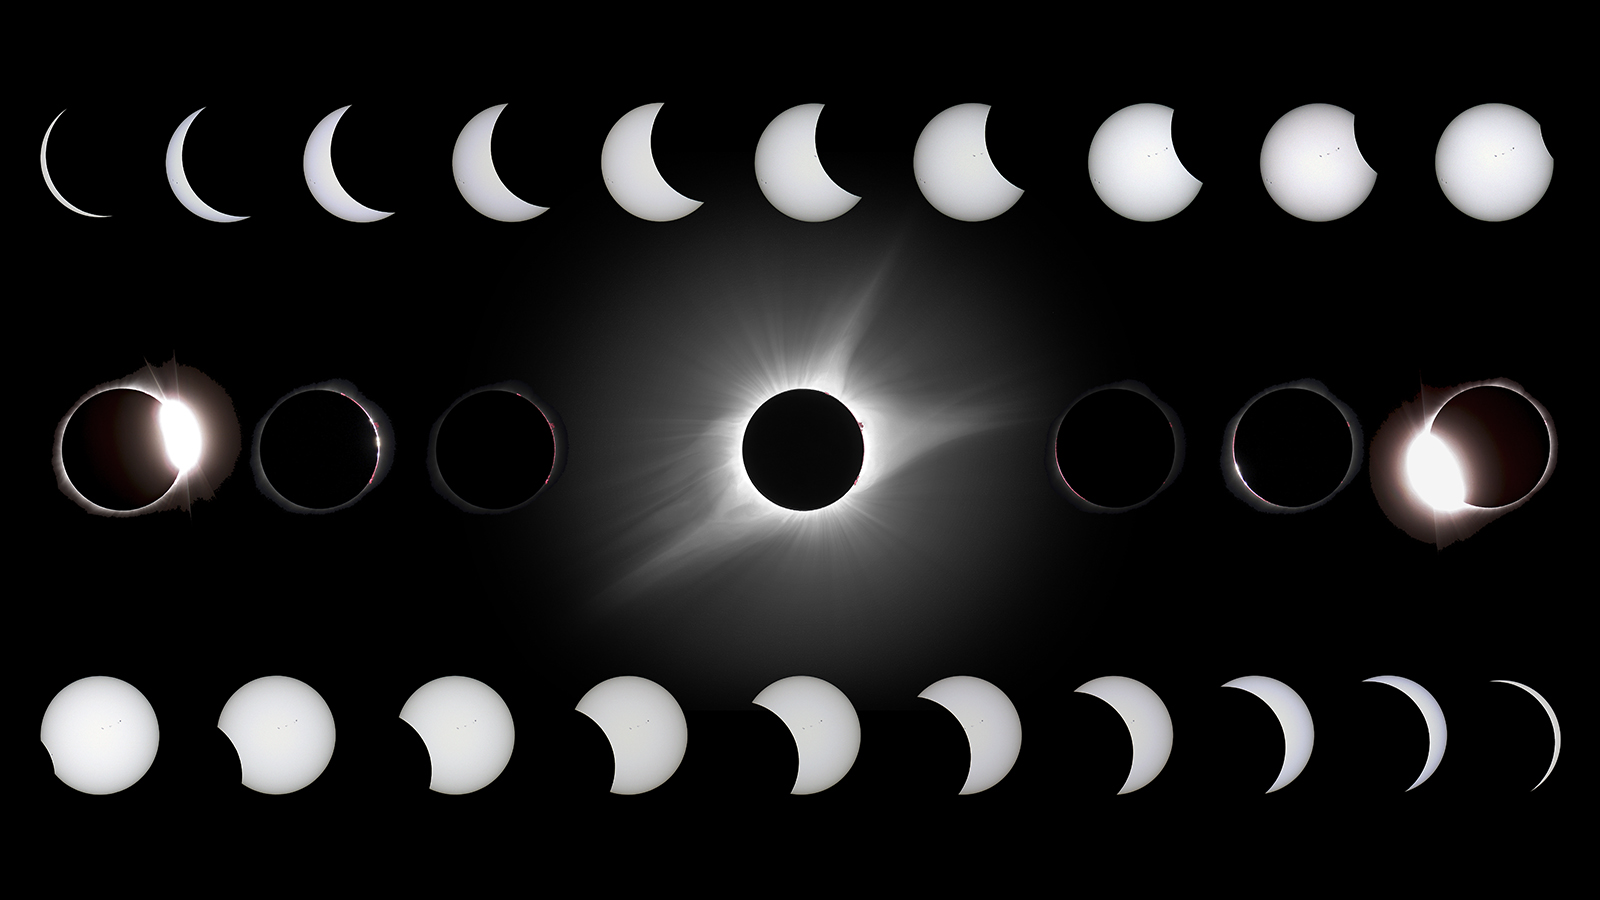 Solar Eclipse Sequence, 21 August 2017